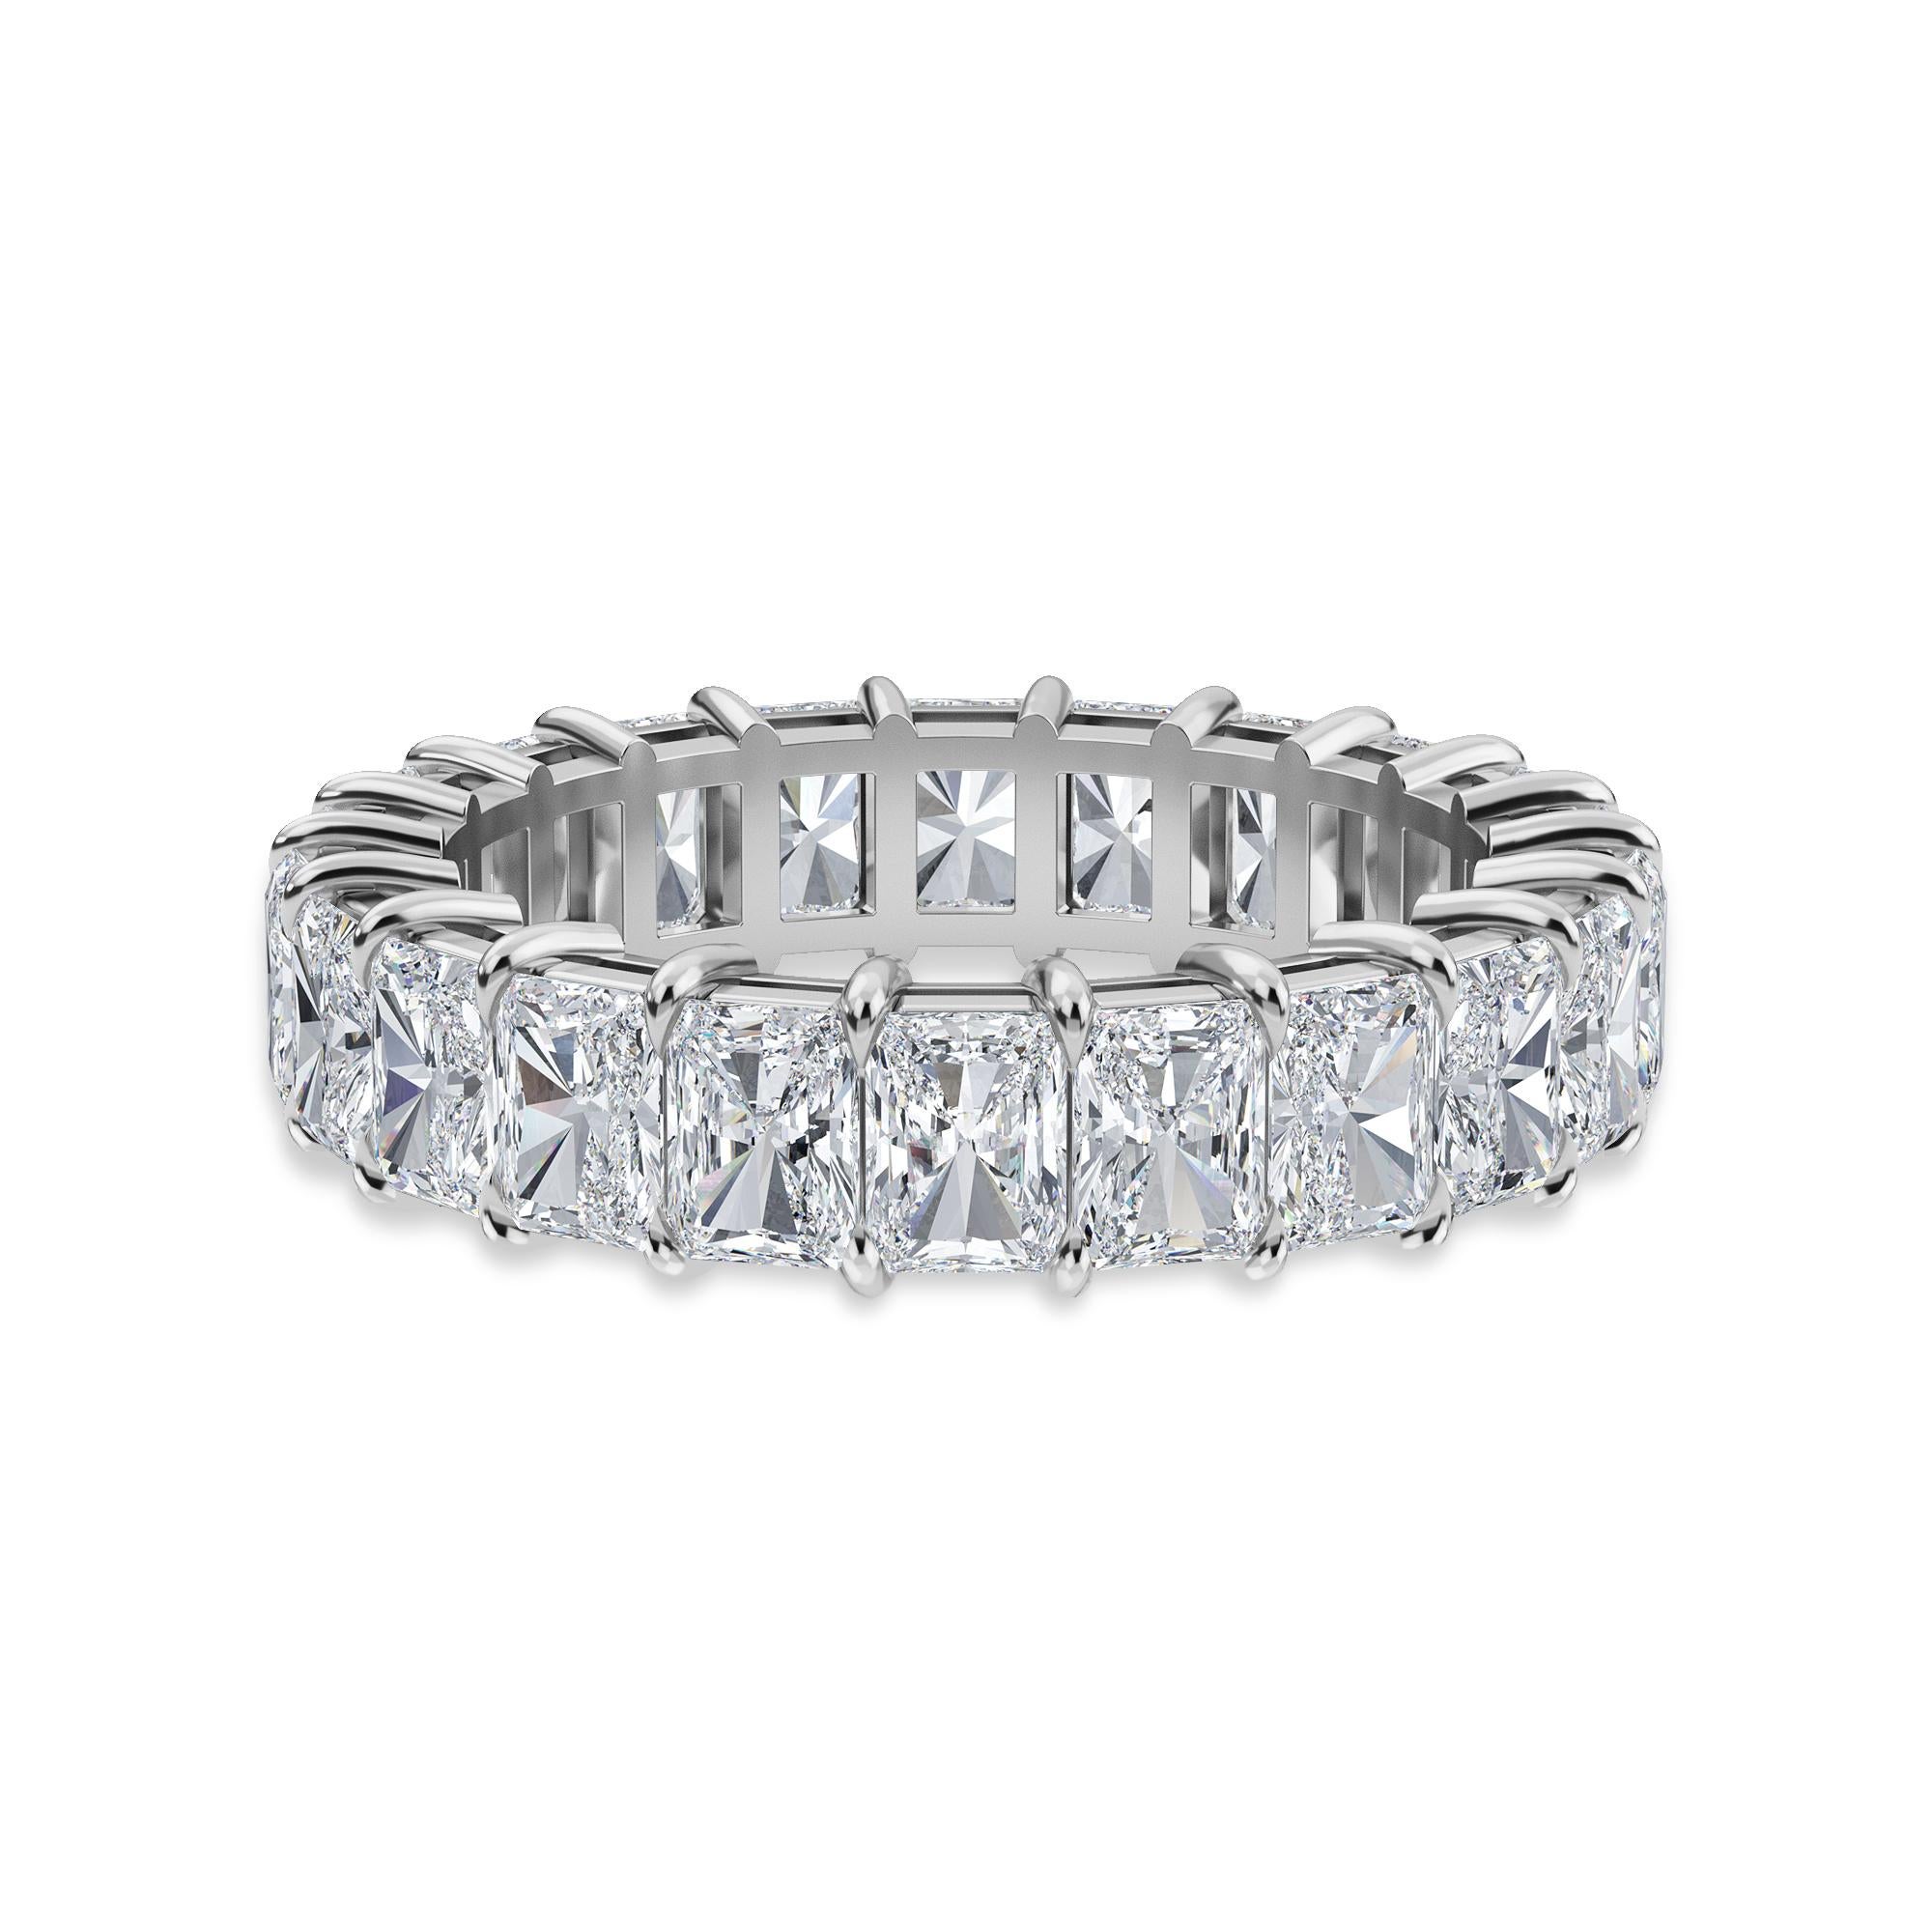 This Radiant Diamond Eternity Band features 22 diamonds with a Total Carat Weight of 4.77. The Diamonds are F-G Color, VS Clarity. The ring is a finger size 6.5 and is set in Platinum.